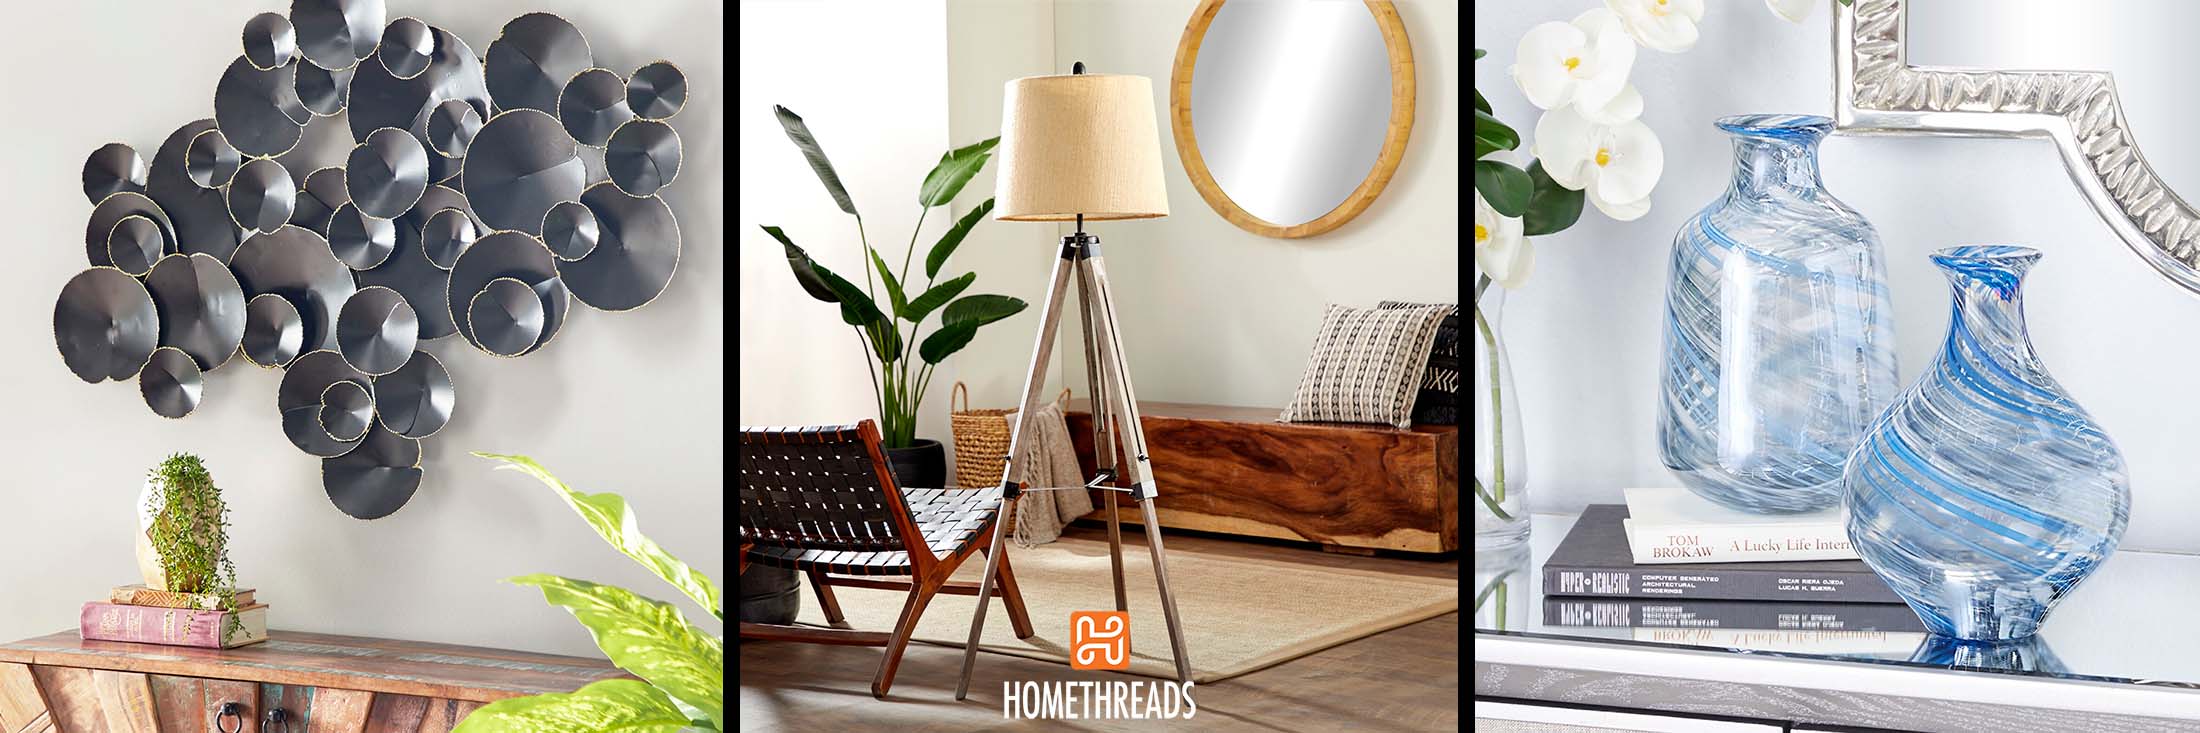 Homethreads Decor and Accent Pieces